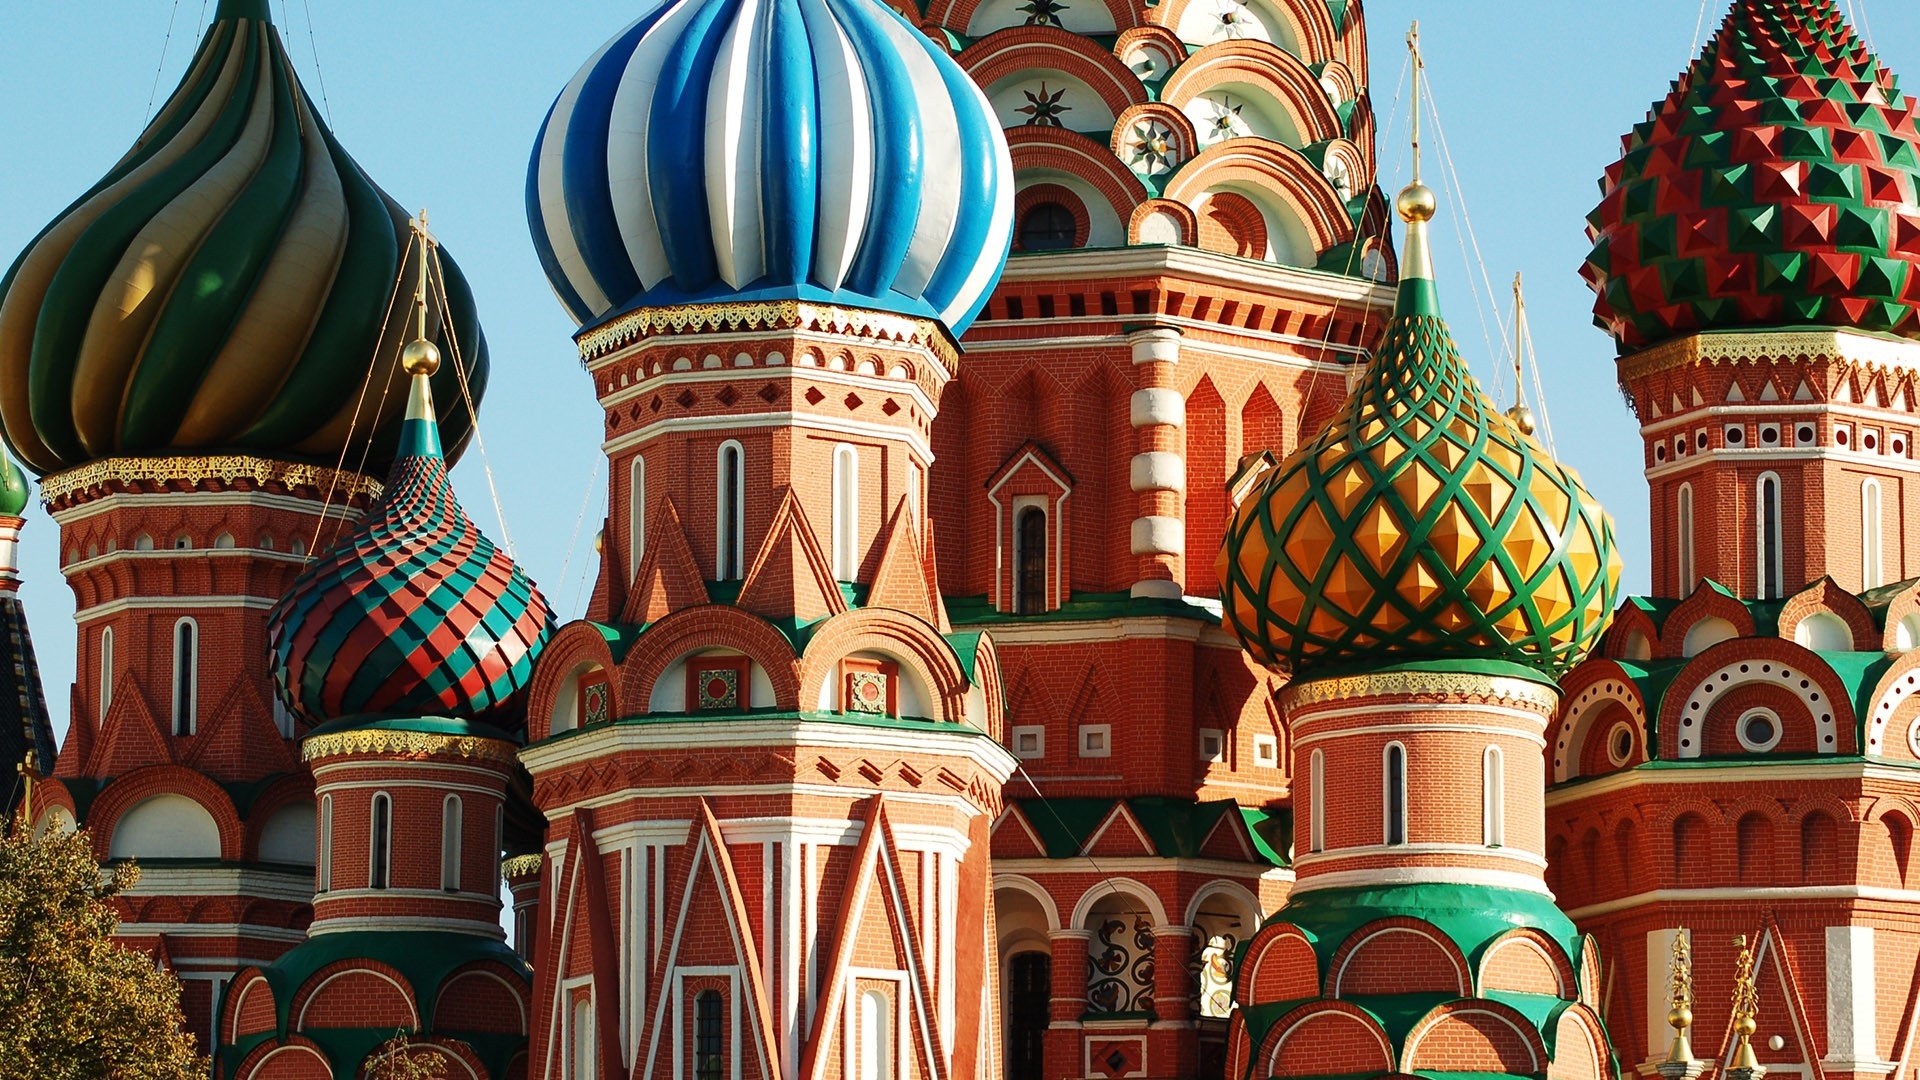 Saint Basil's Cathedral, Colorful domes, Windows 10 spotlight, Russian architecture, 1920x1080 Full HD Desktop